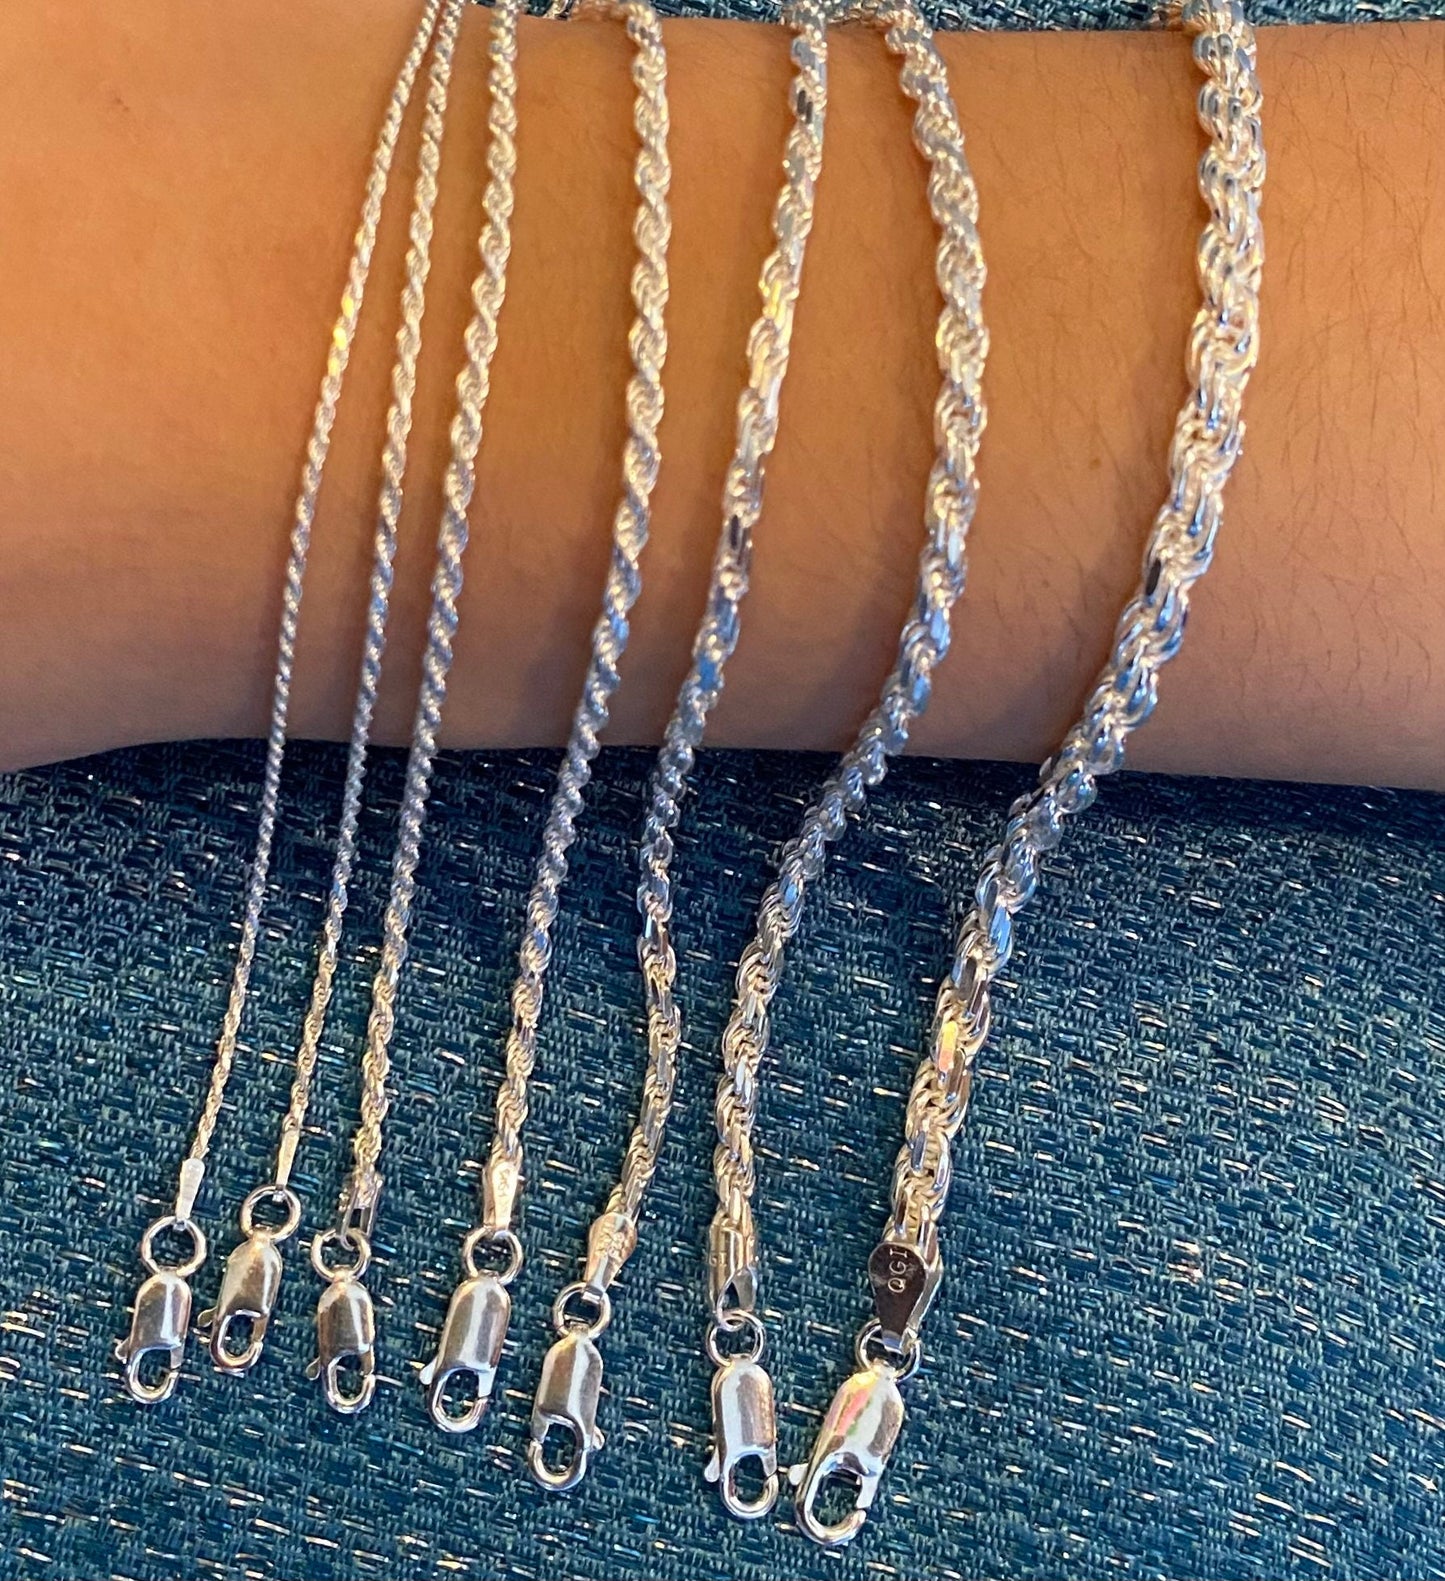 Sterling Silver 925 Diamond-cut Rope Chain Necklace Bracelet Anklet 7",8",9",10",14".16",18",20",22",24",26",28", 30" or 36" different width - Lazuli